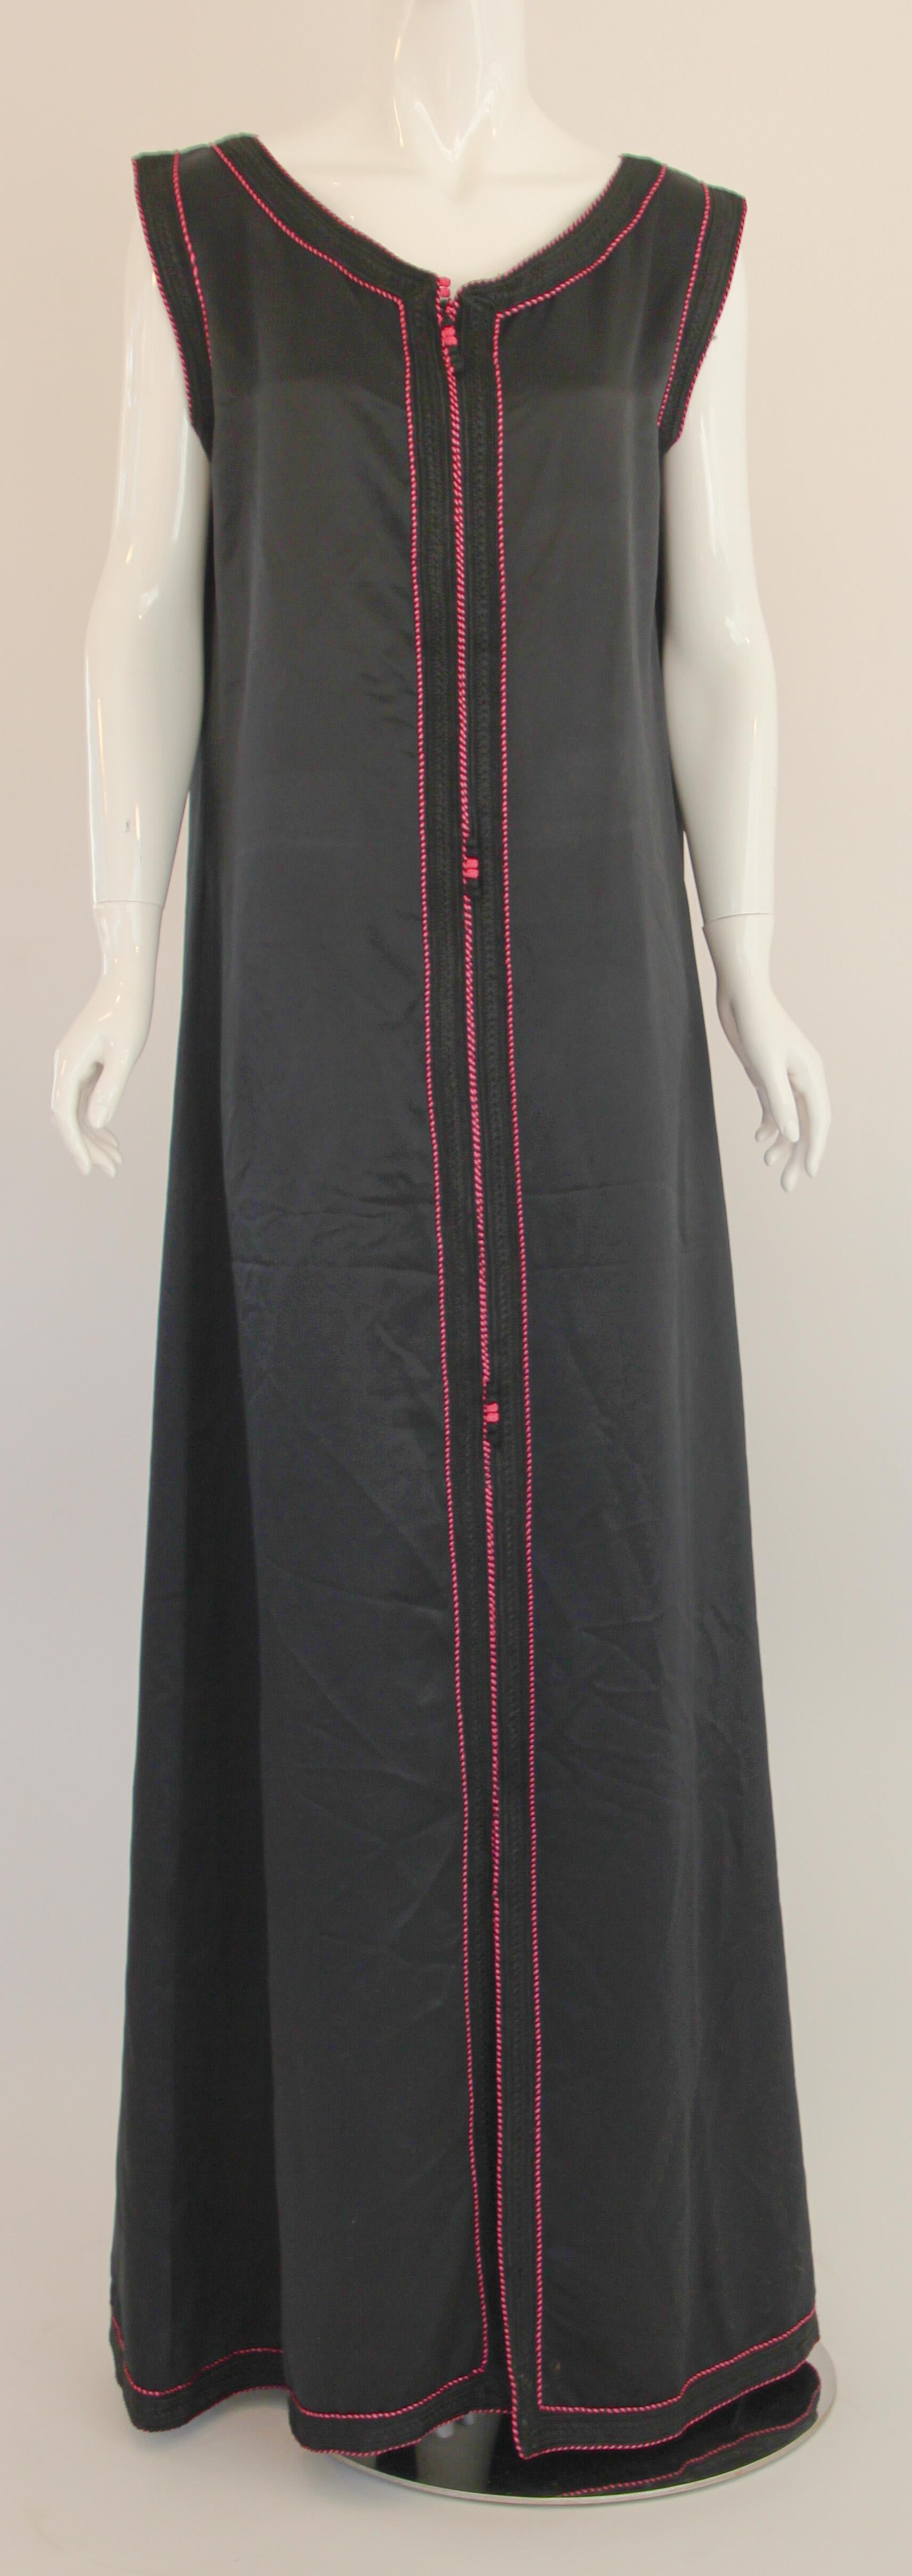 Vintage Caftan Sleeveless Black with Pink Embroidered, ca. 1980s For Sale 4